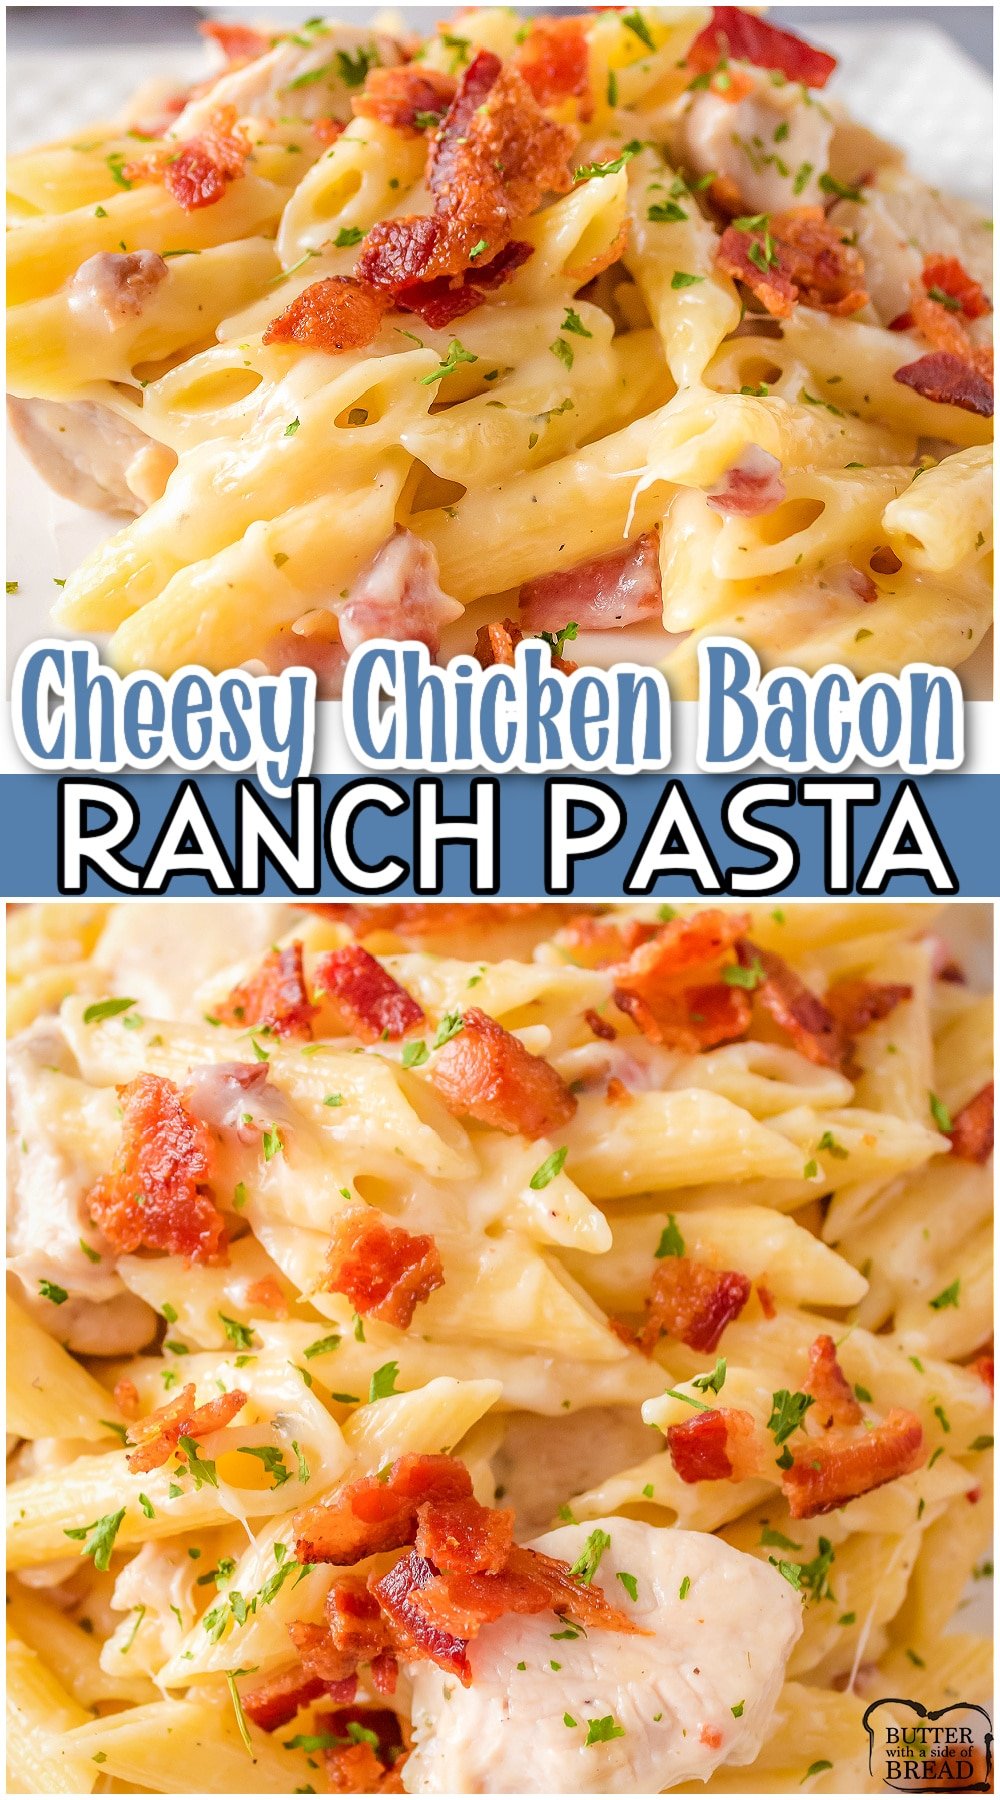 Chicken Bacon Ranch Pasta made with simple ingredients for an easy, flavorful weeknight dinner! Creamy, cheesy chicken pasta with bacon.